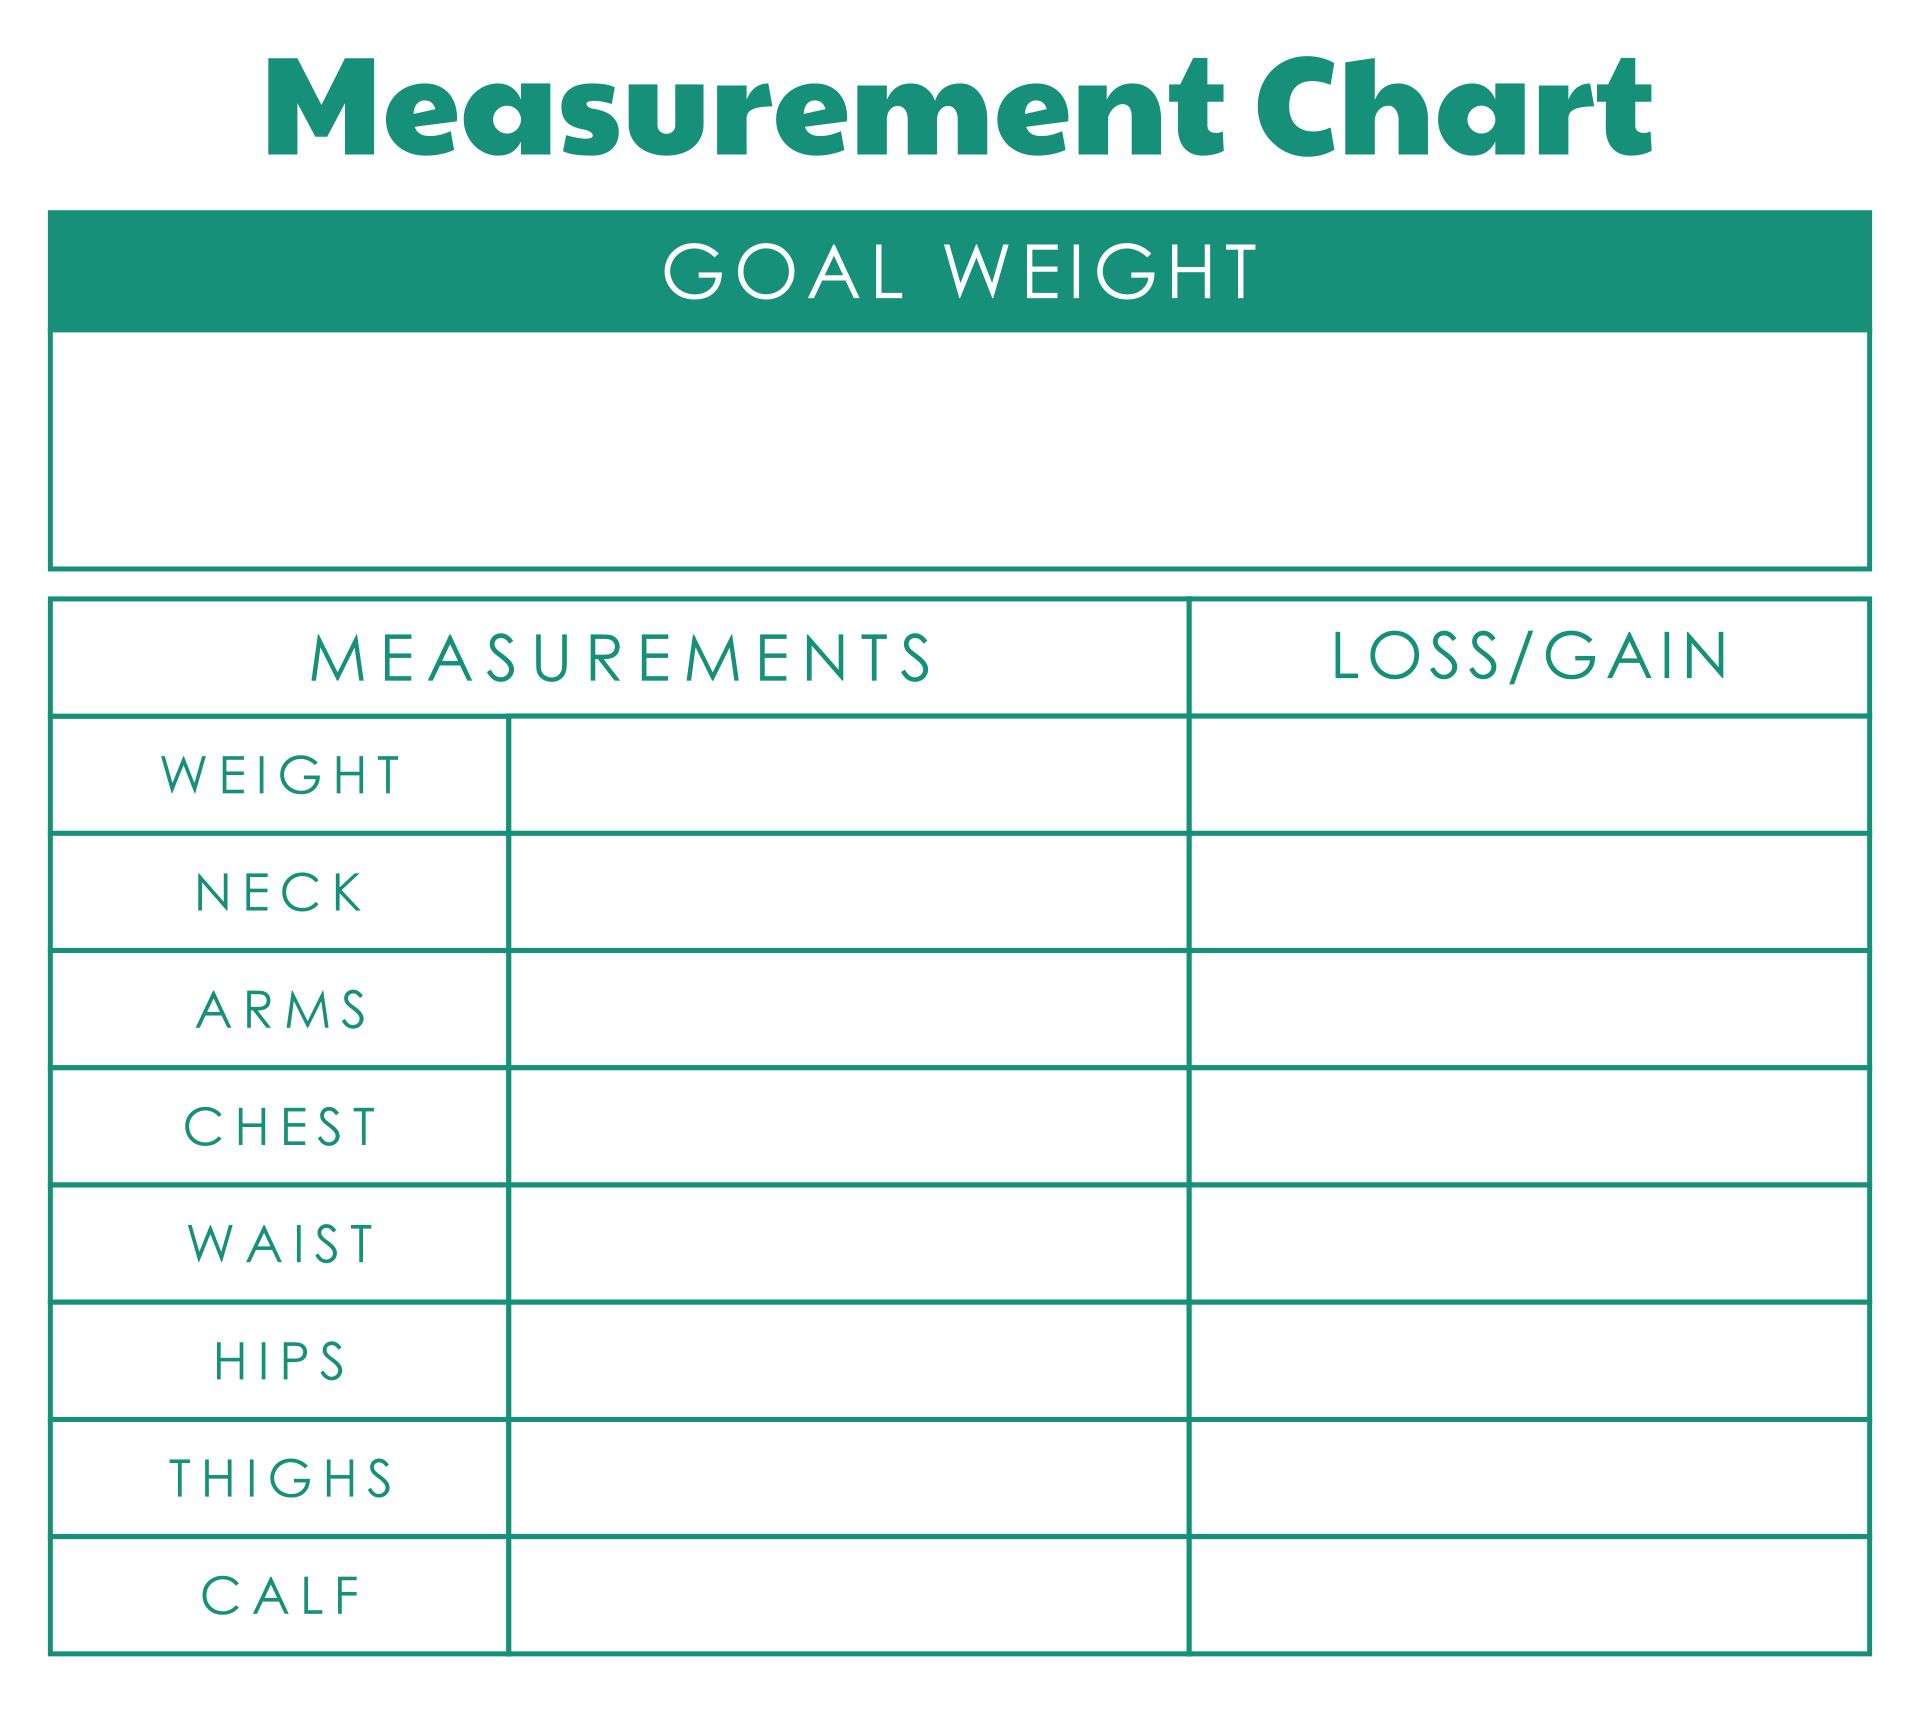 8-best-images-of-weight-loss-logs-charts-printable-printable-daily-weight-loss-chart